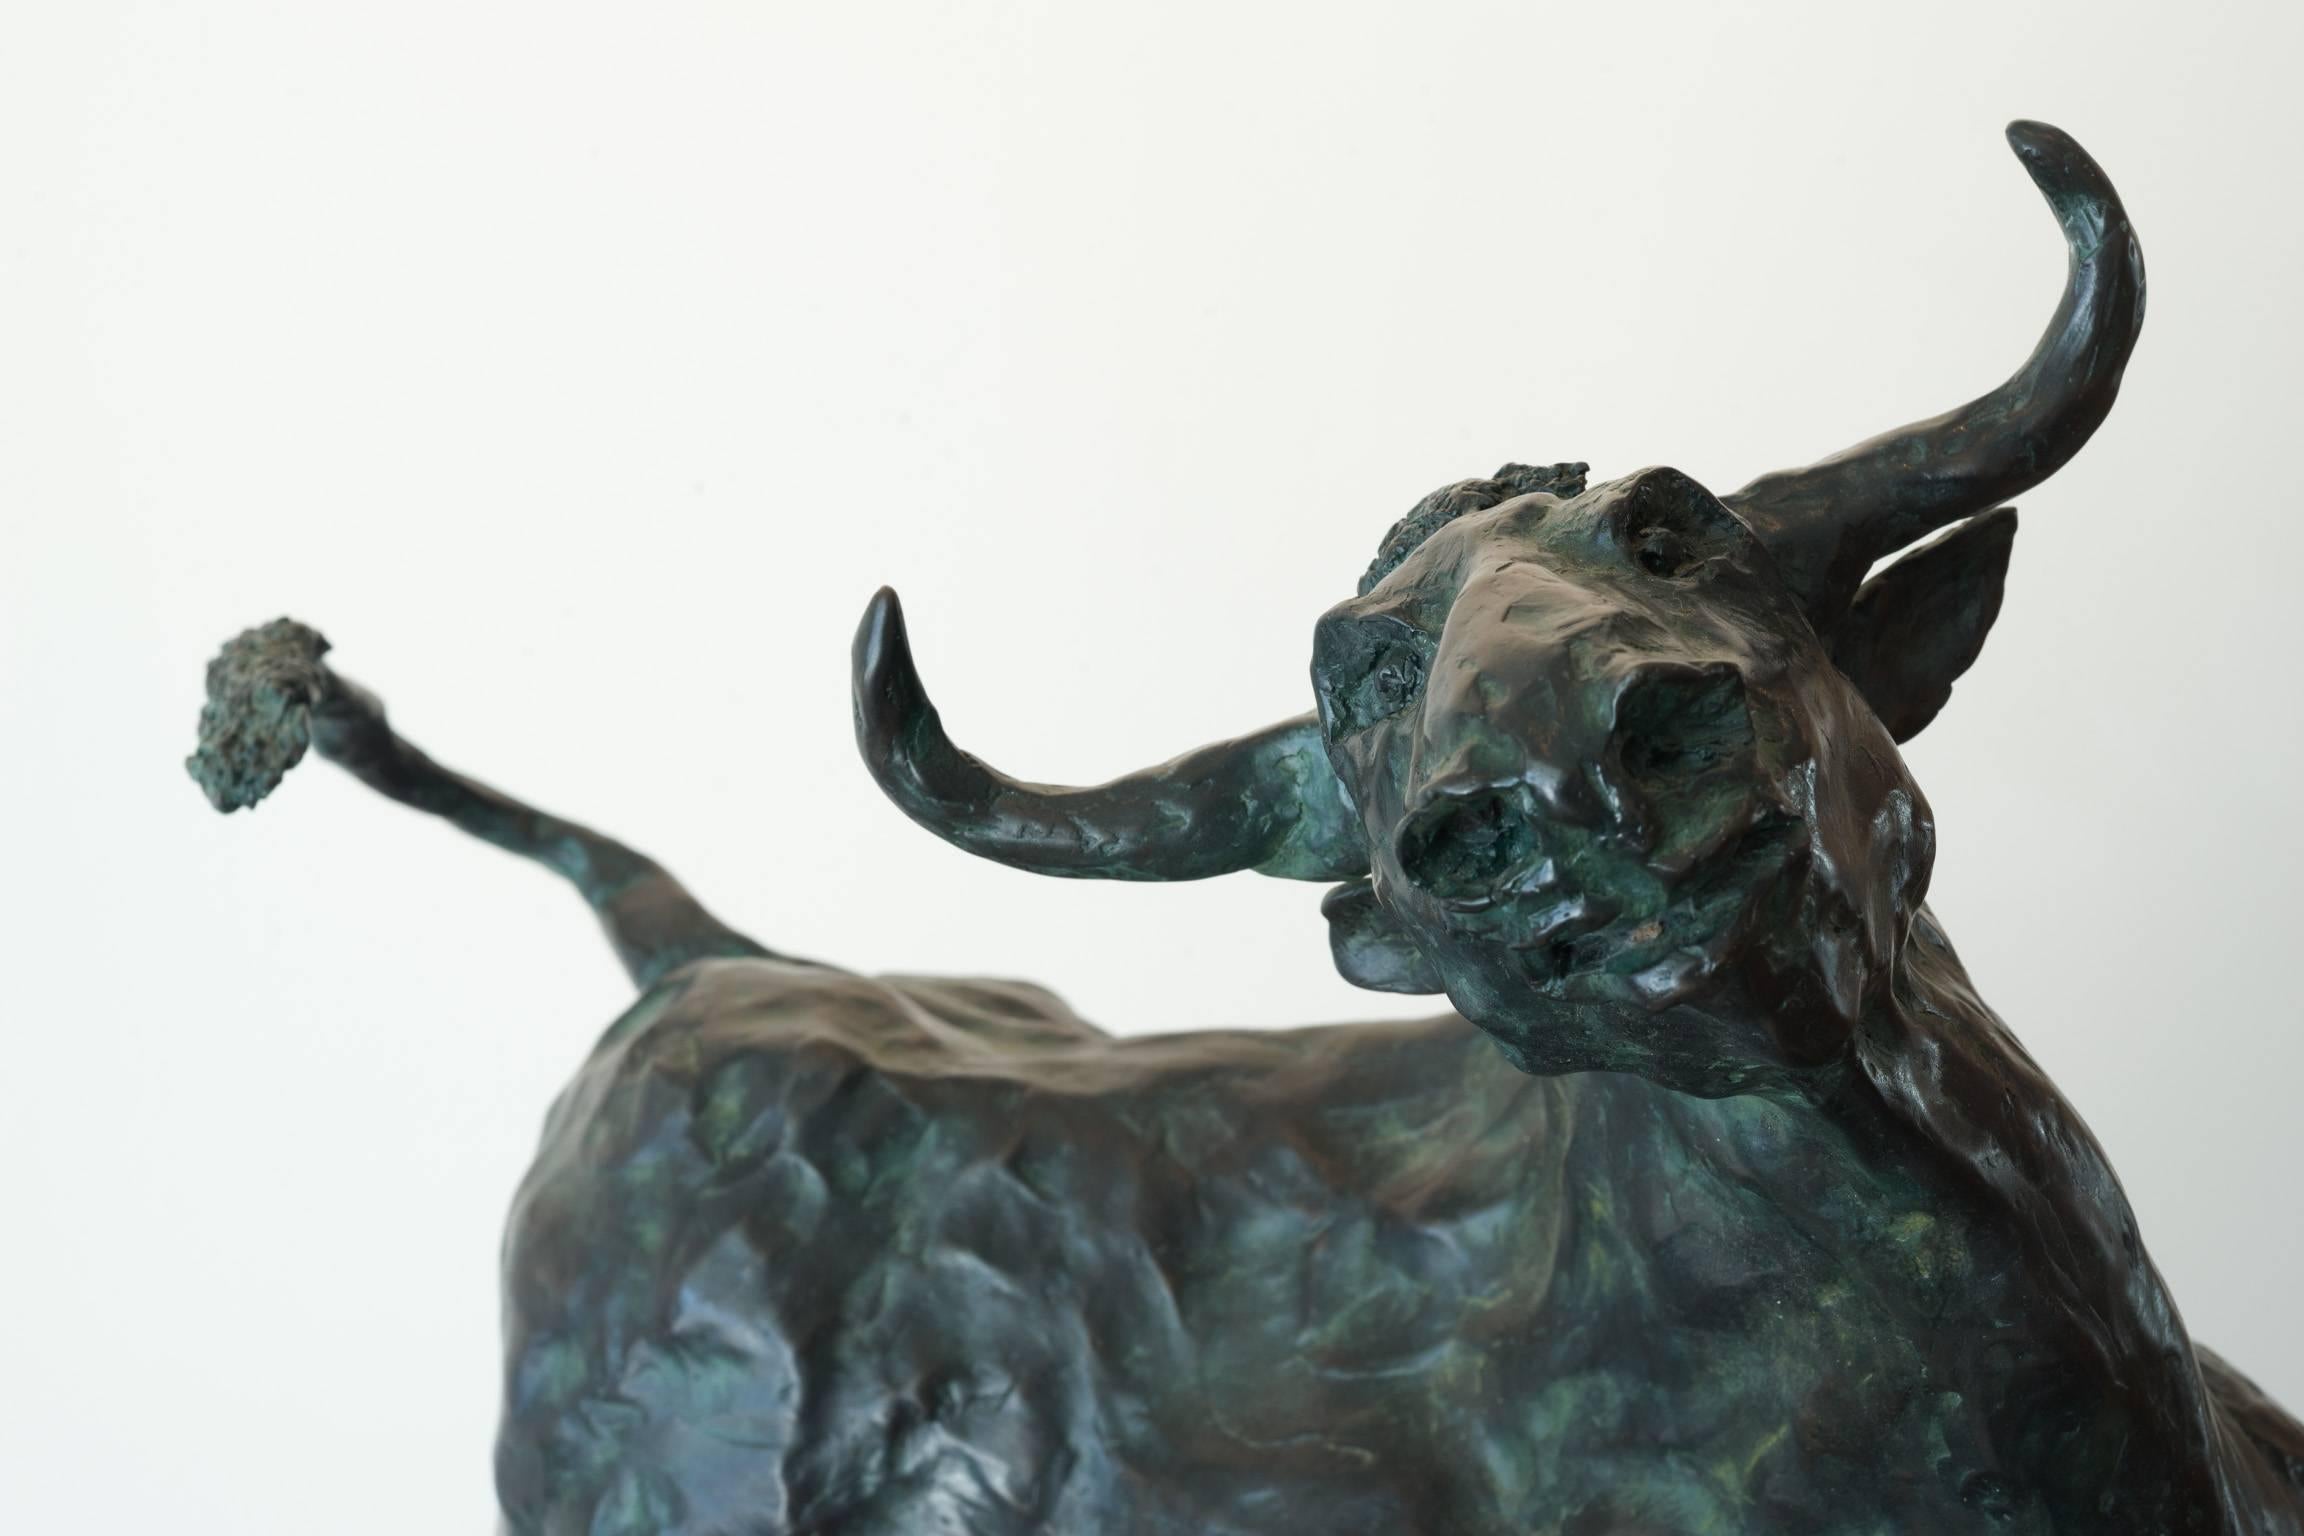 Bull - Gold Figurative Sculpture by Don Wilks